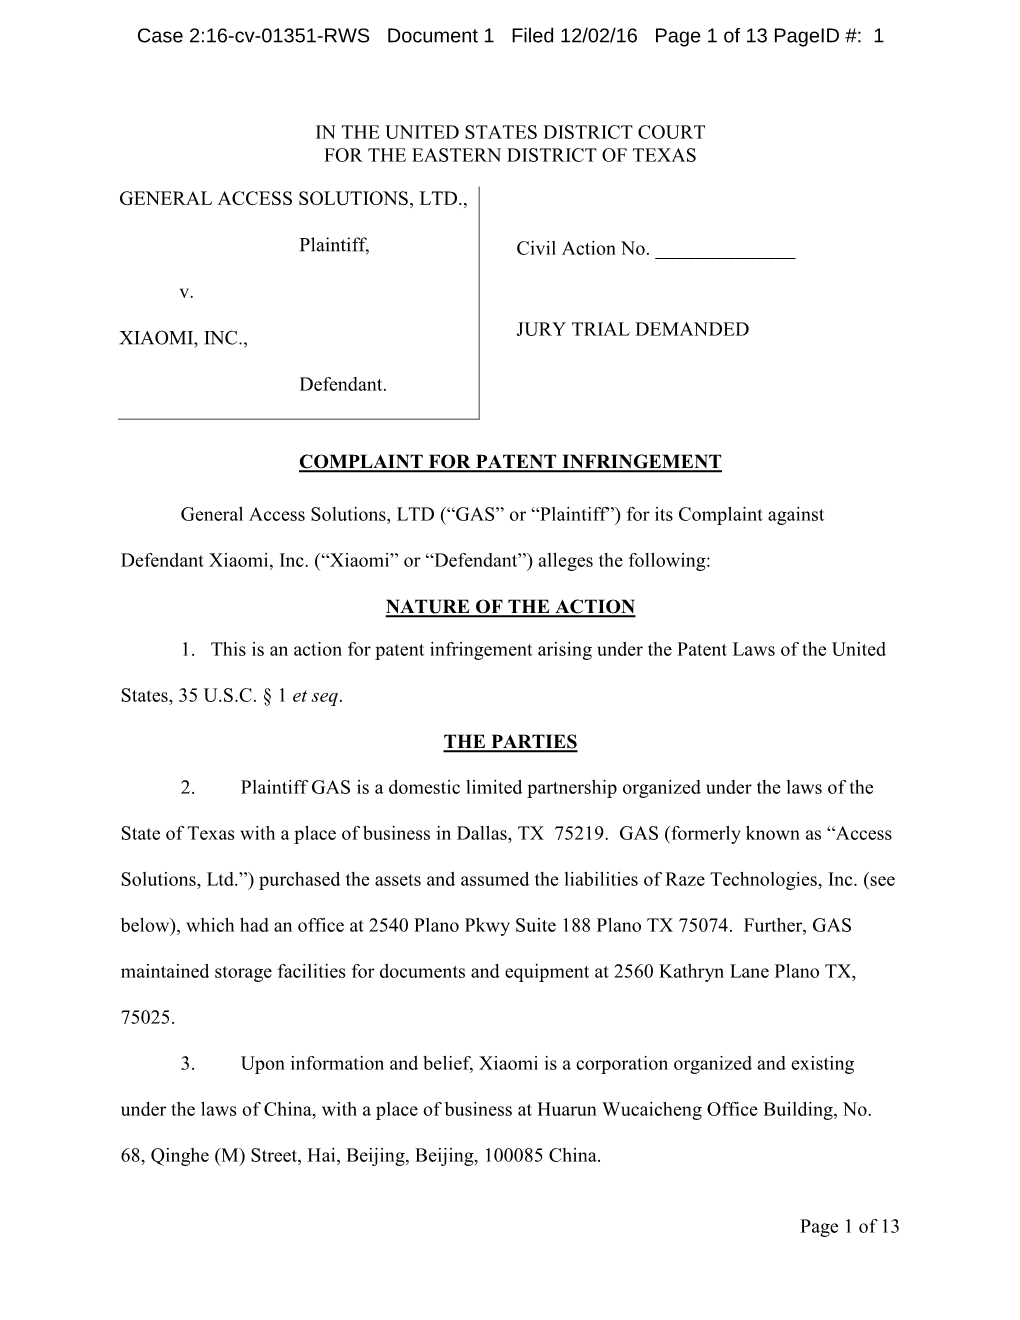 Of 13 in the UNITED STATES DISTRICT COURT for the EASTERN DISTRICT of TEXAS GENERAL ACCESS SOLUTIONS, LTD., Plaintiff, V